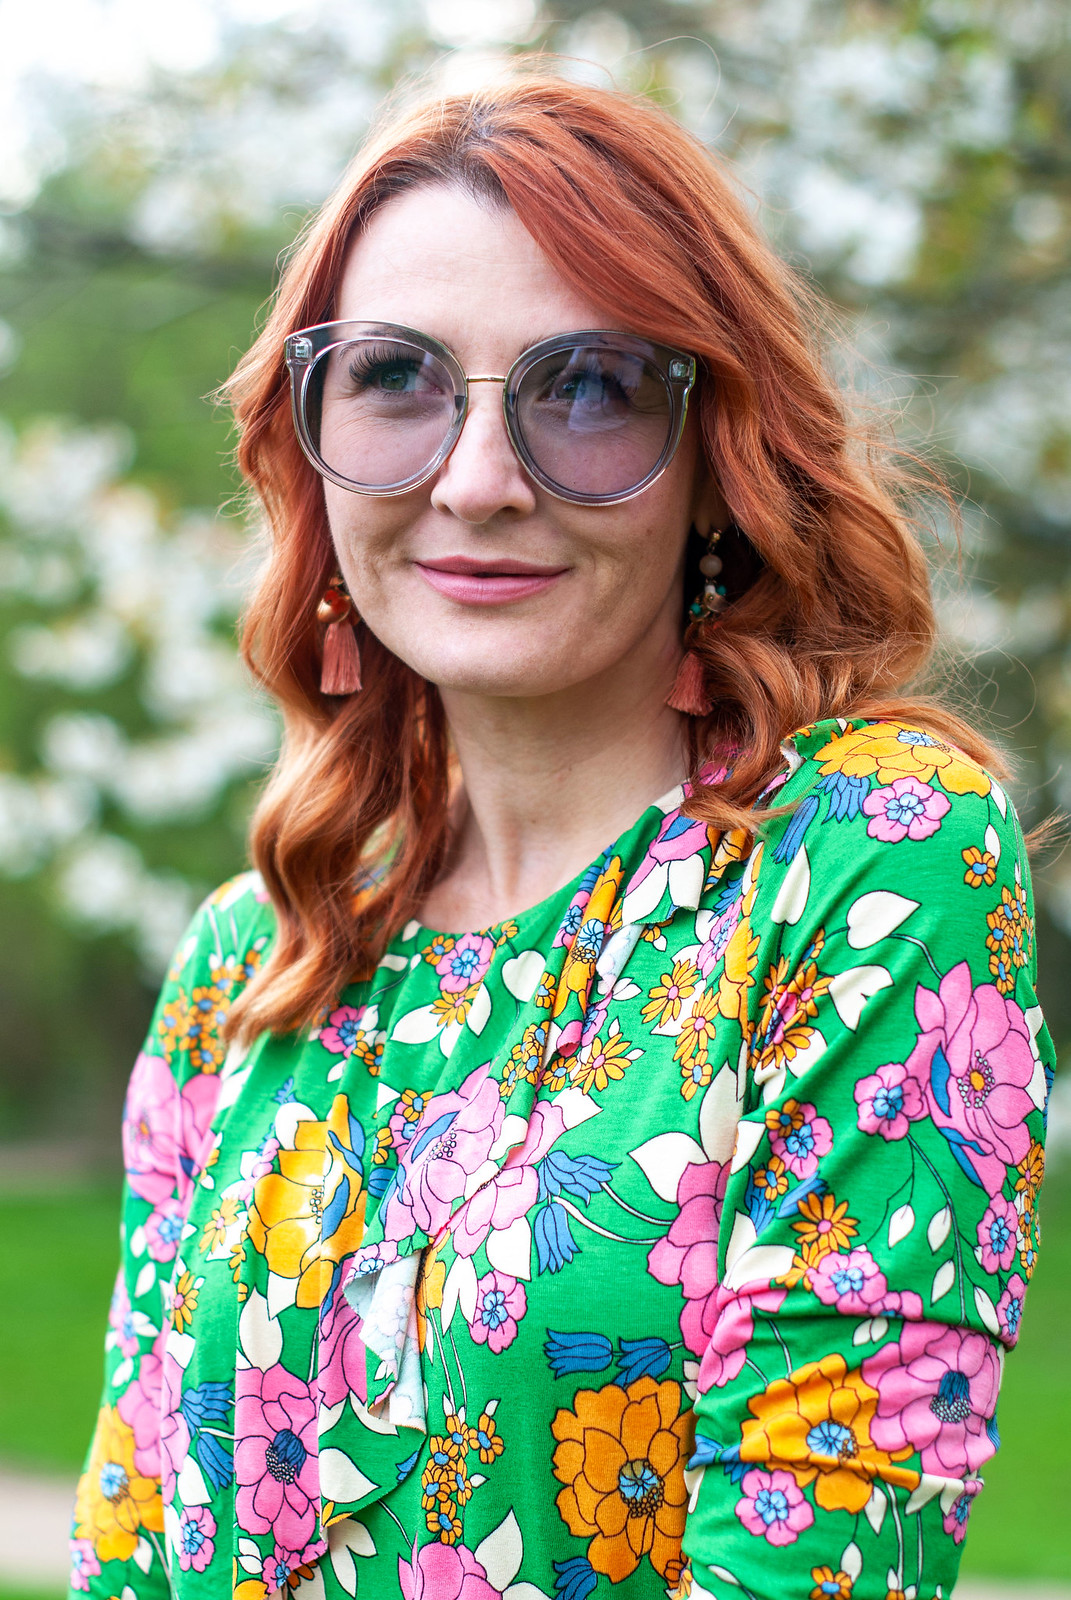 Wearing a Psychedelic Spring Florals Dress: 60 style floral midi dress with asymmetric hem \ summer style \ bright colours \ outfit of the day \ ootd | Not Dressed As Lamb, over 40 style